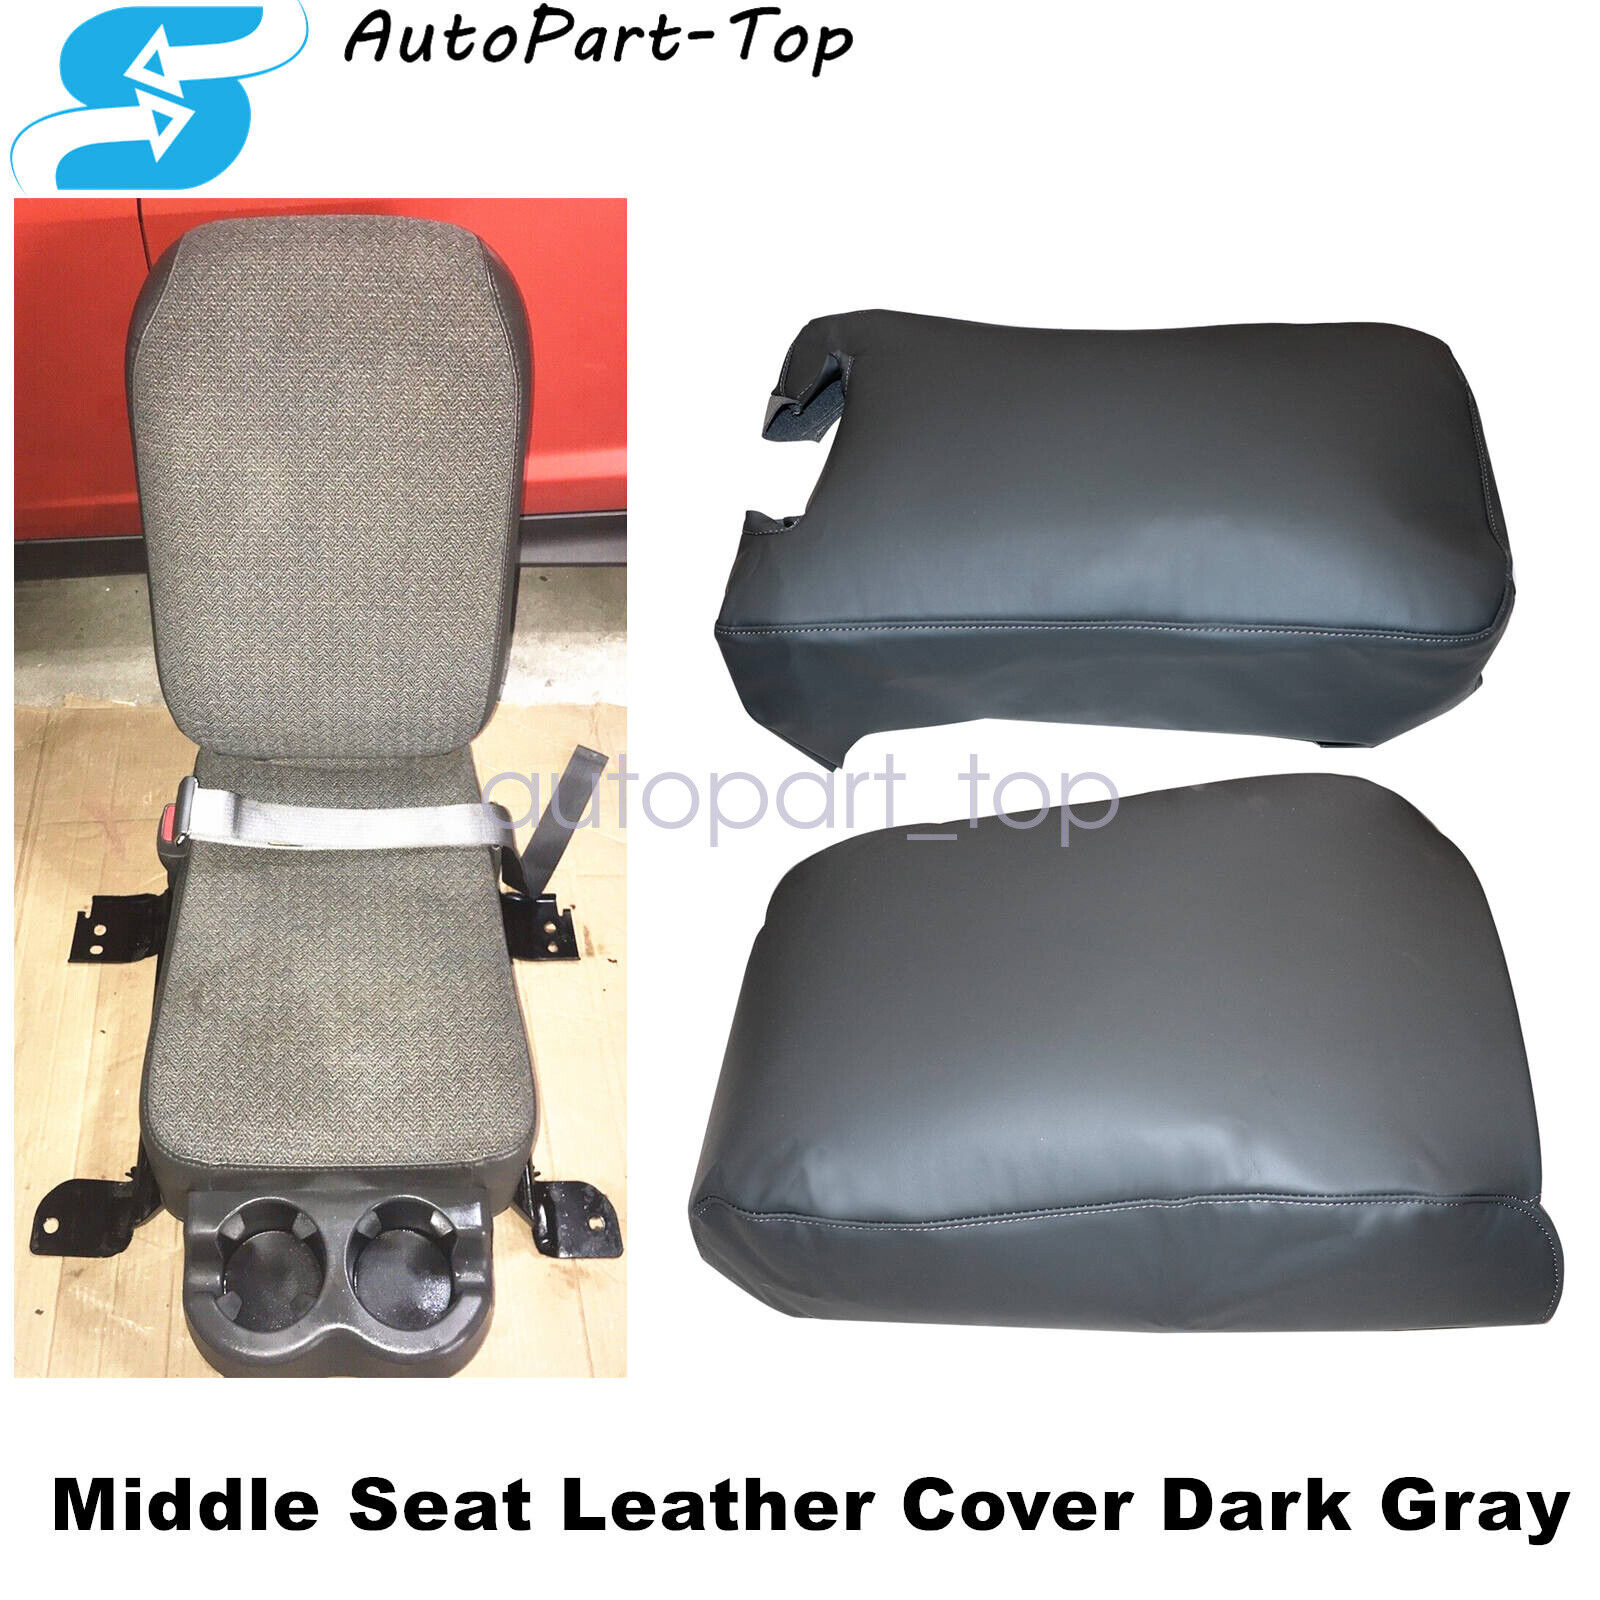 For 1999-2006 Chevy Silverado Front 40/20/40 Seat Middle Seat Cover Dark Gray